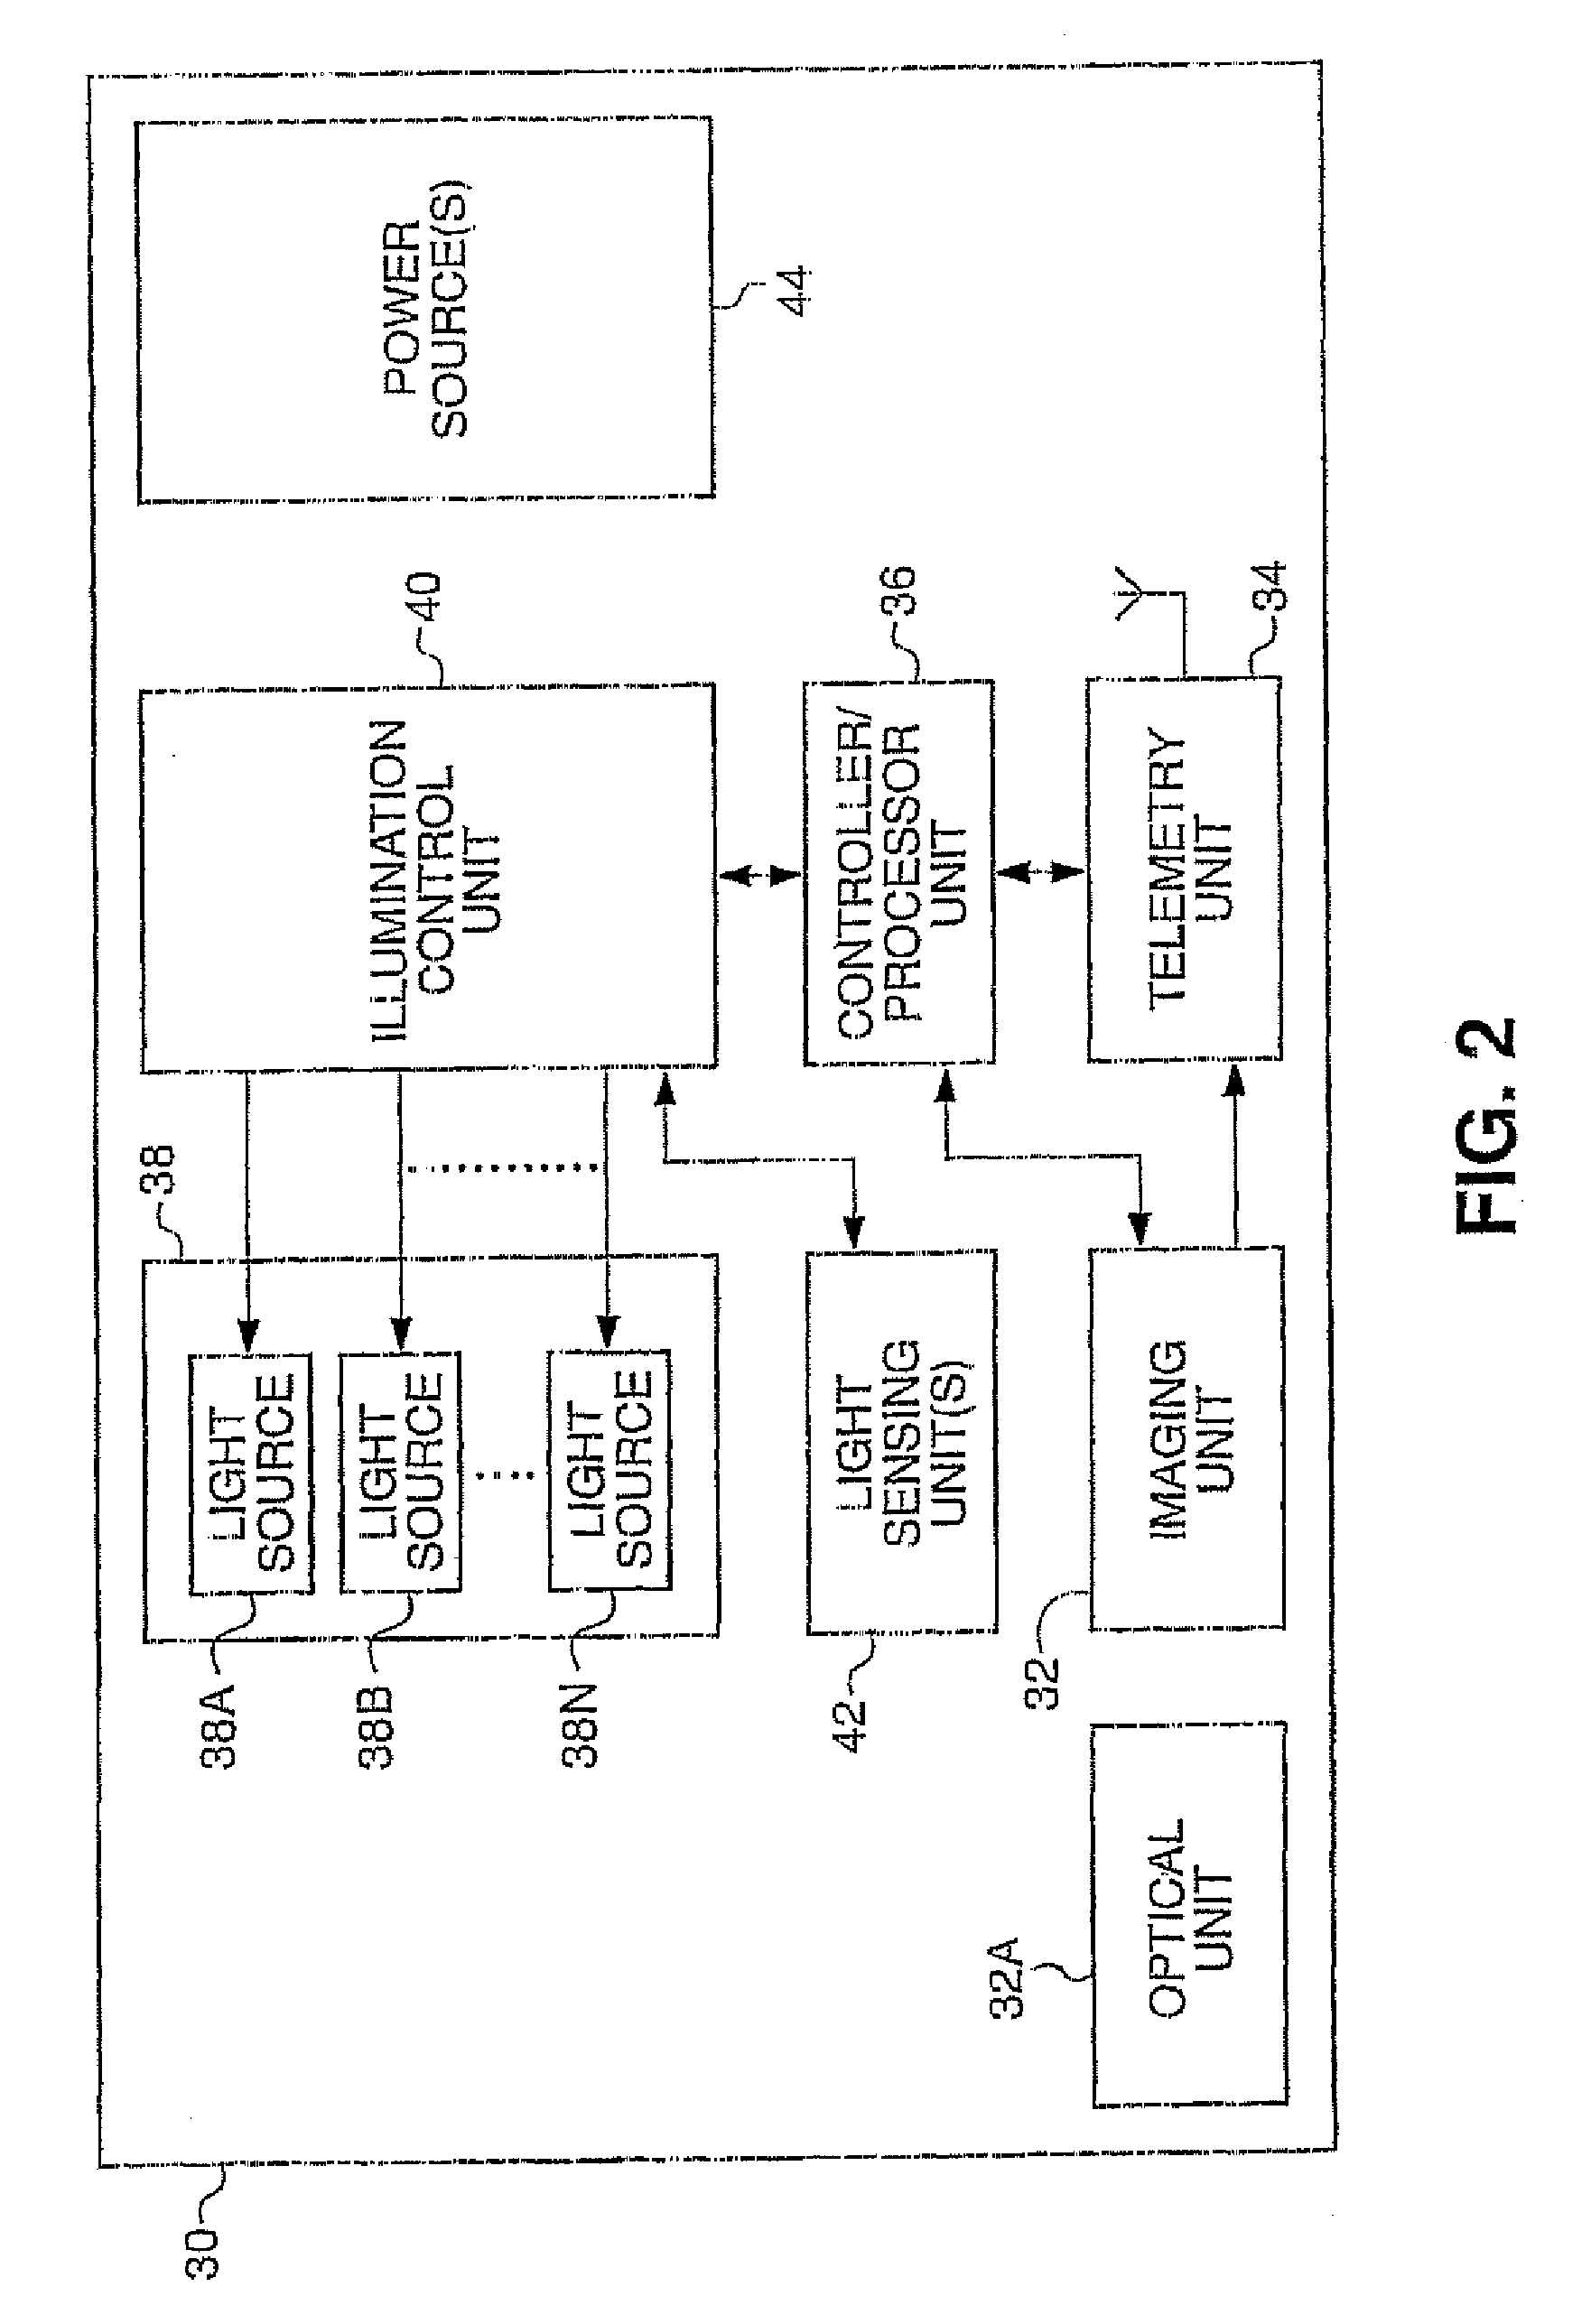 Apparatus and method for light control in an in-vivo imaging device